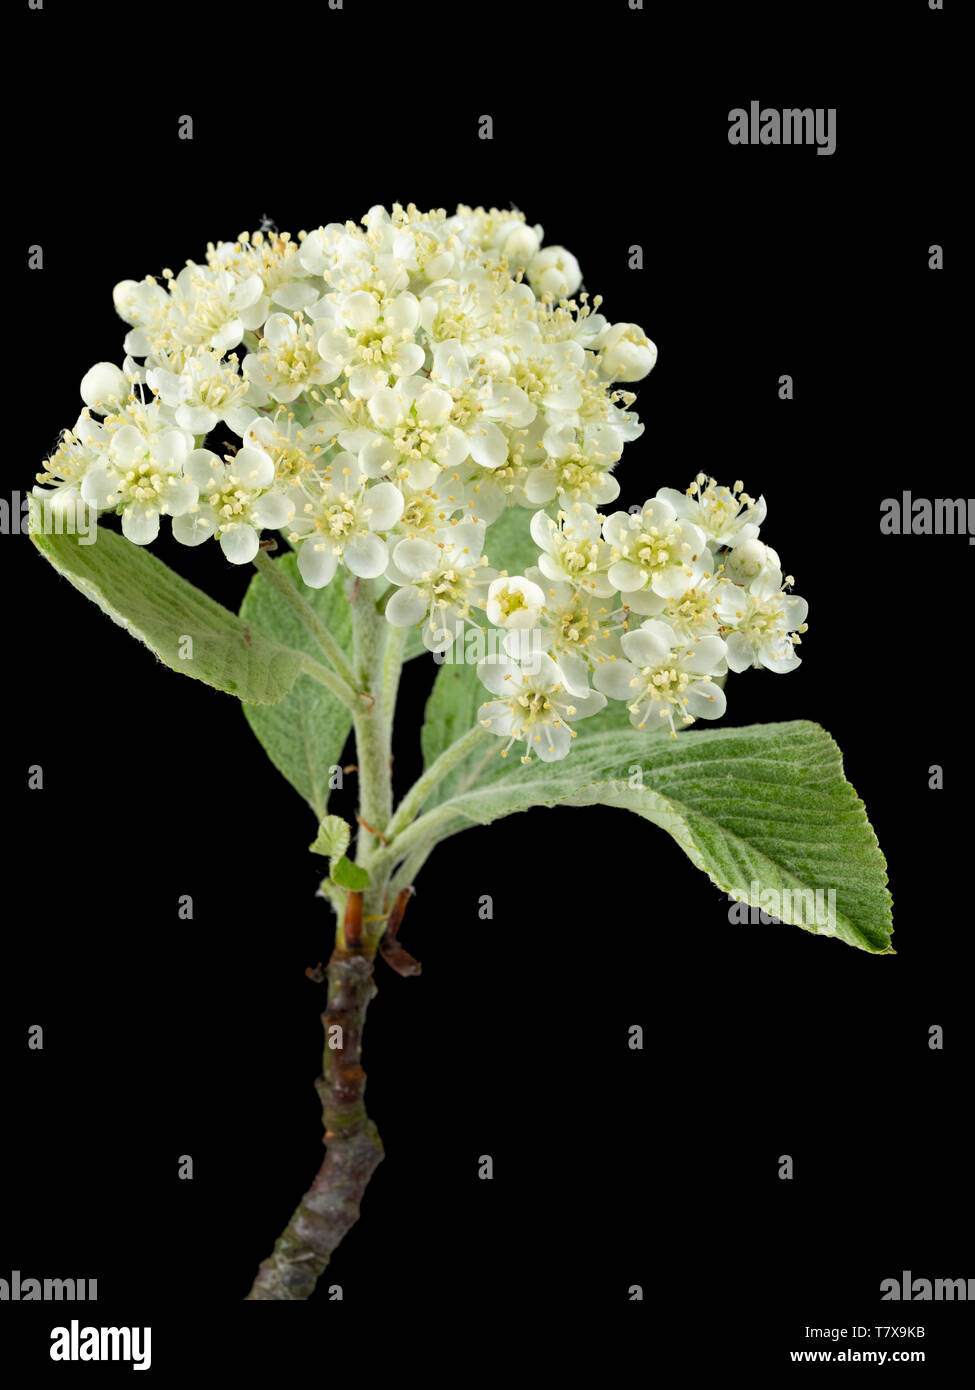 Silvery spring foliage and creamy flowers of the hardy whitebeam tree, Sorbus aria 'Lutescens', on a black background Stock Photo